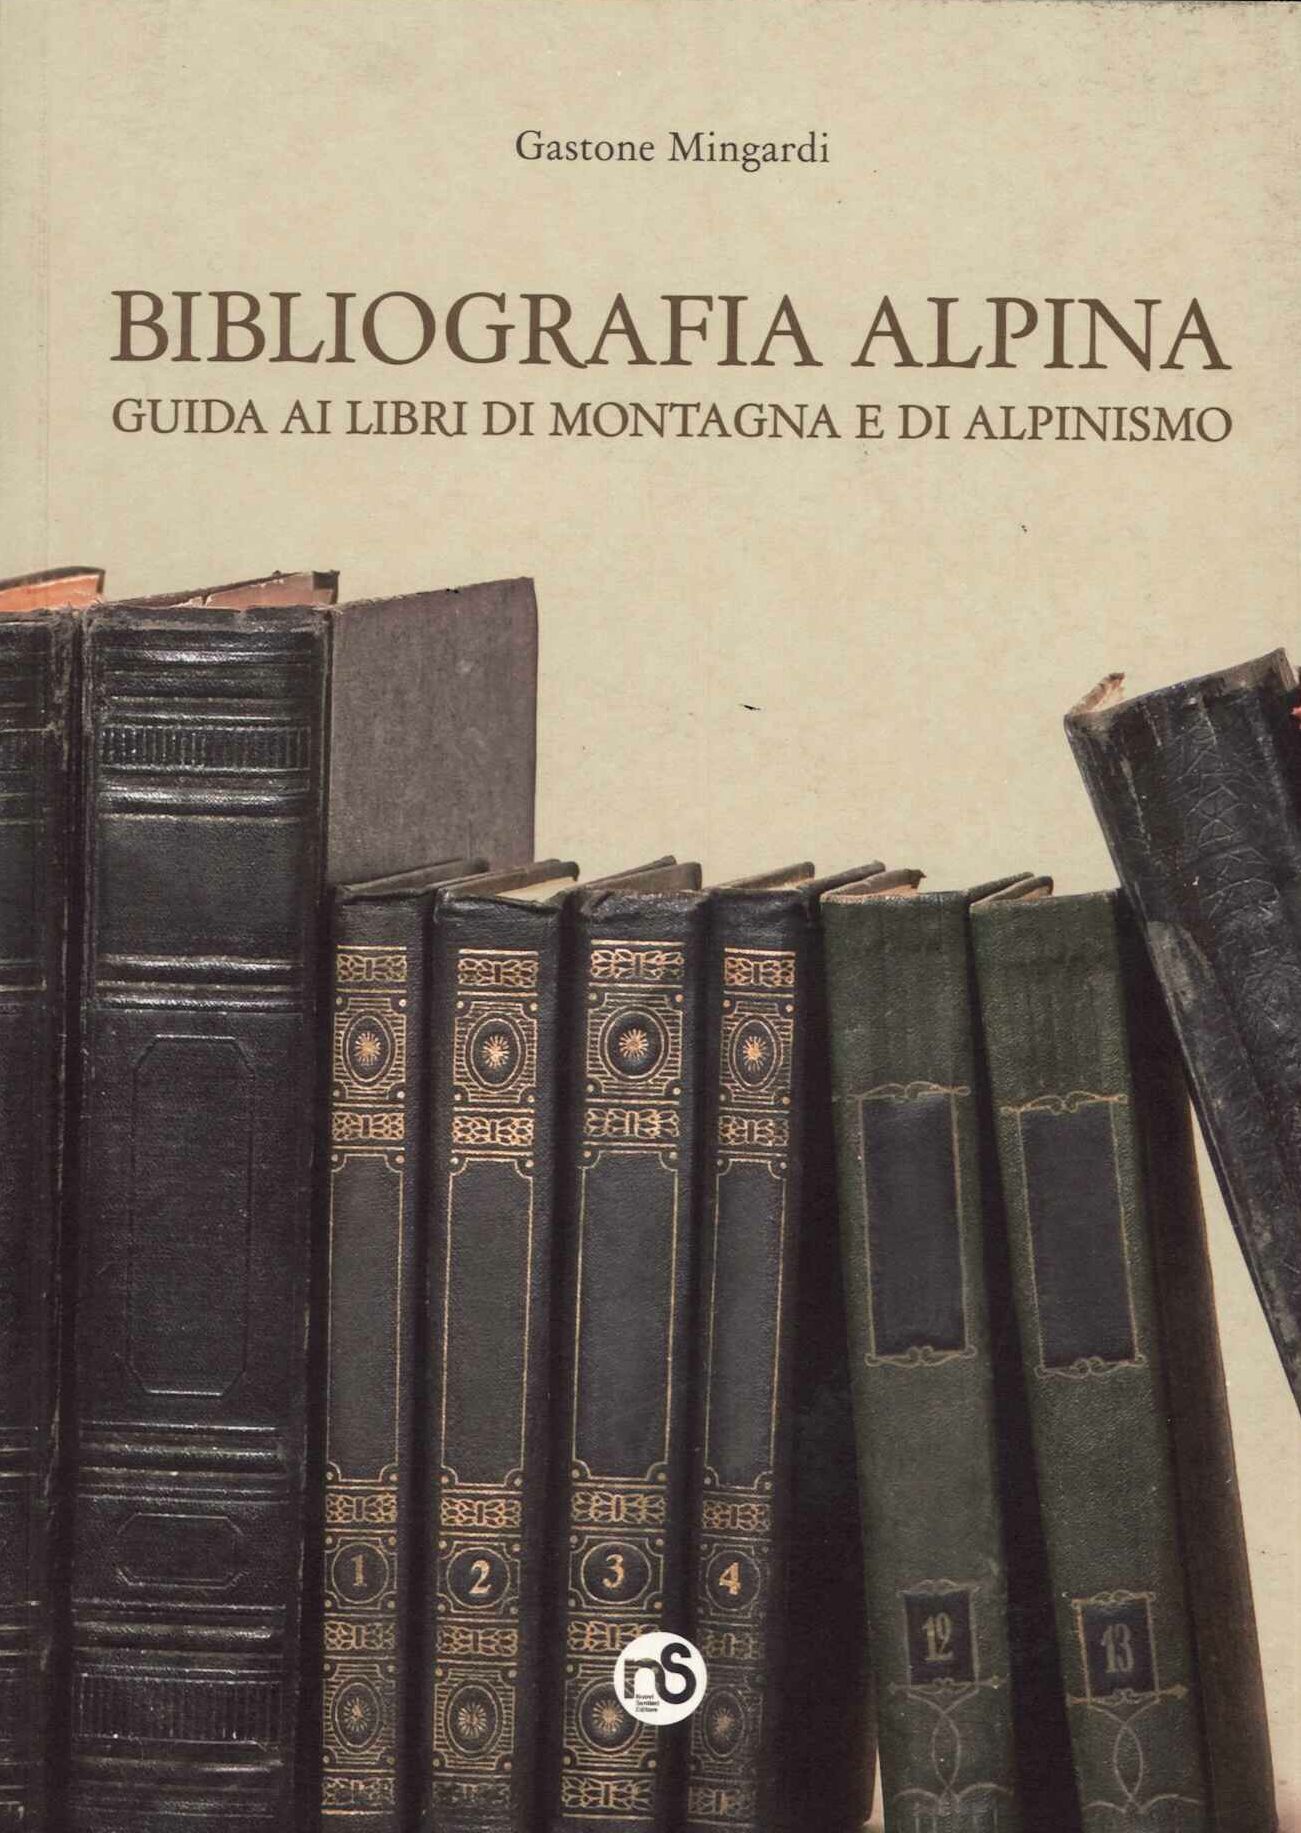 https://www.libreriaagora.com/images/products/1735.jpg